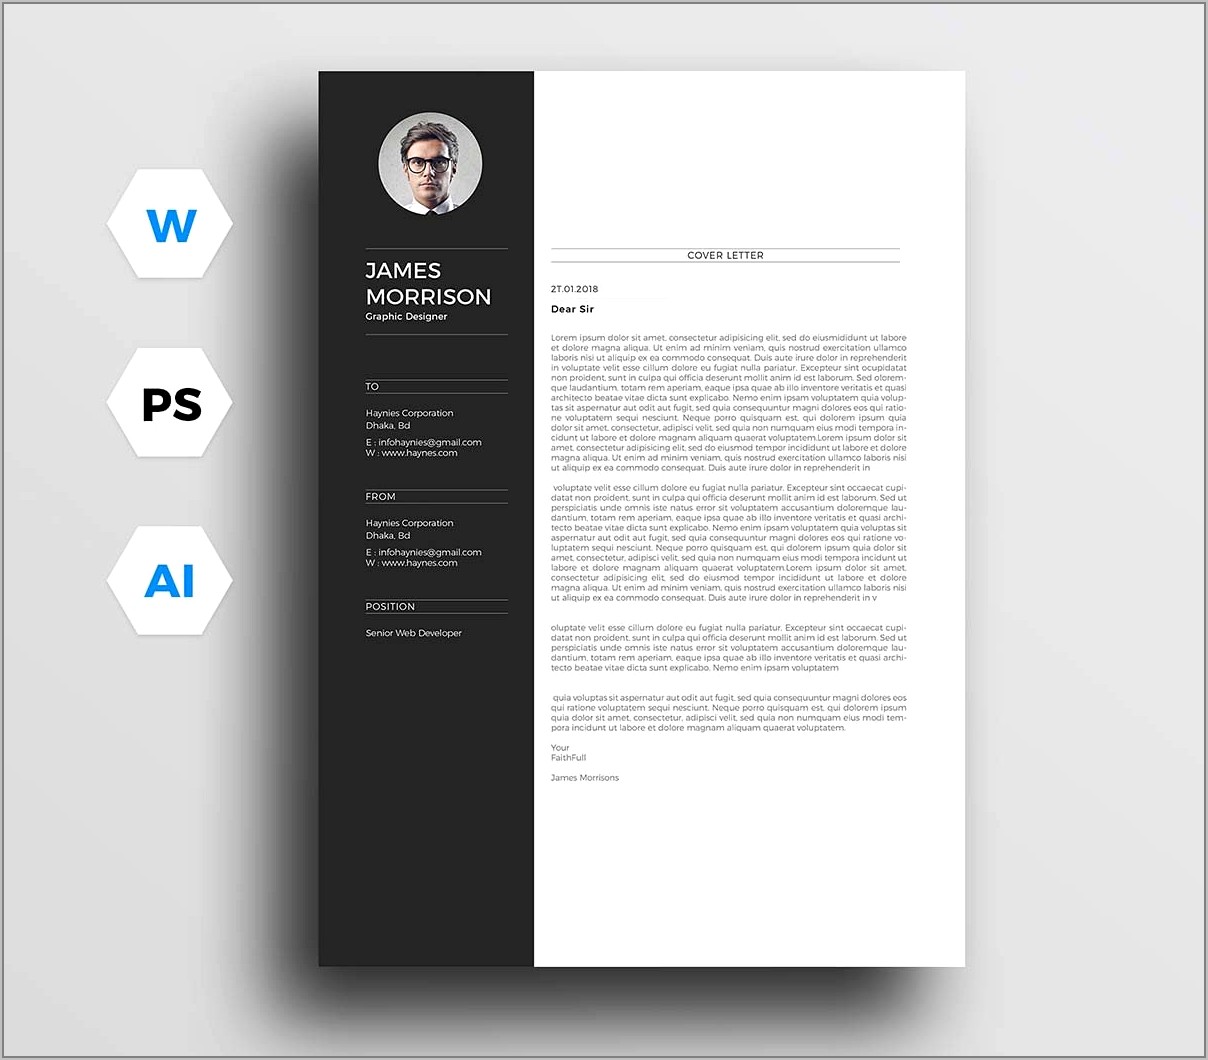 Microsoft Word Resume Cover Letter Template Free